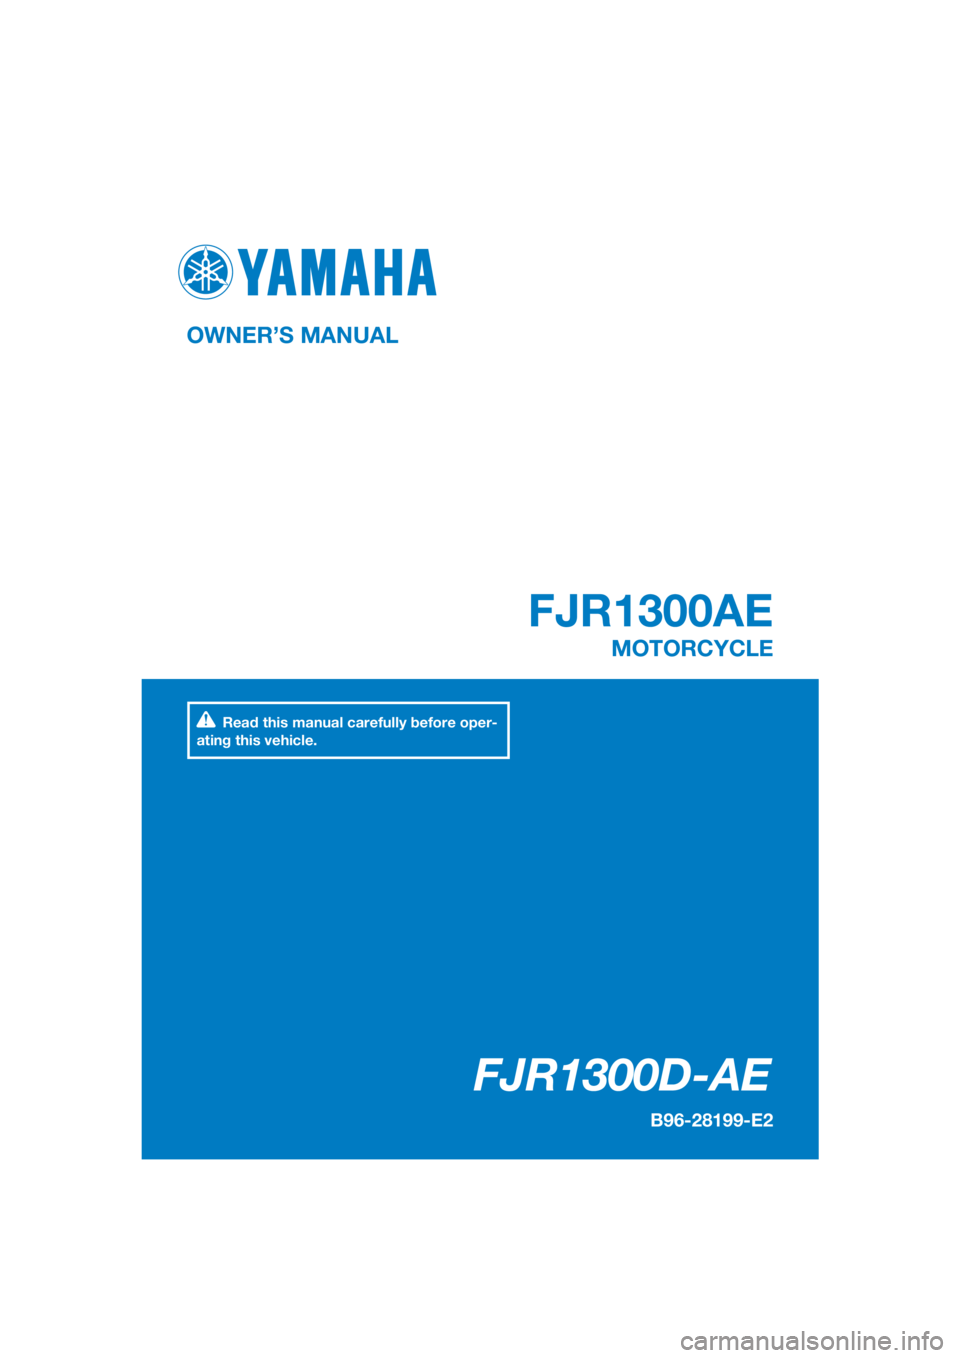 YAMAHA FJR1300AE 2020  Owners Manual DIC183
FJR1300D-AE
FJR1300AE
OWNER’S MANUAL
B96-28199-E2
MOTORCYCLE
[English  (E)]
Read this manual carefully before oper-
ating this vehicle. 